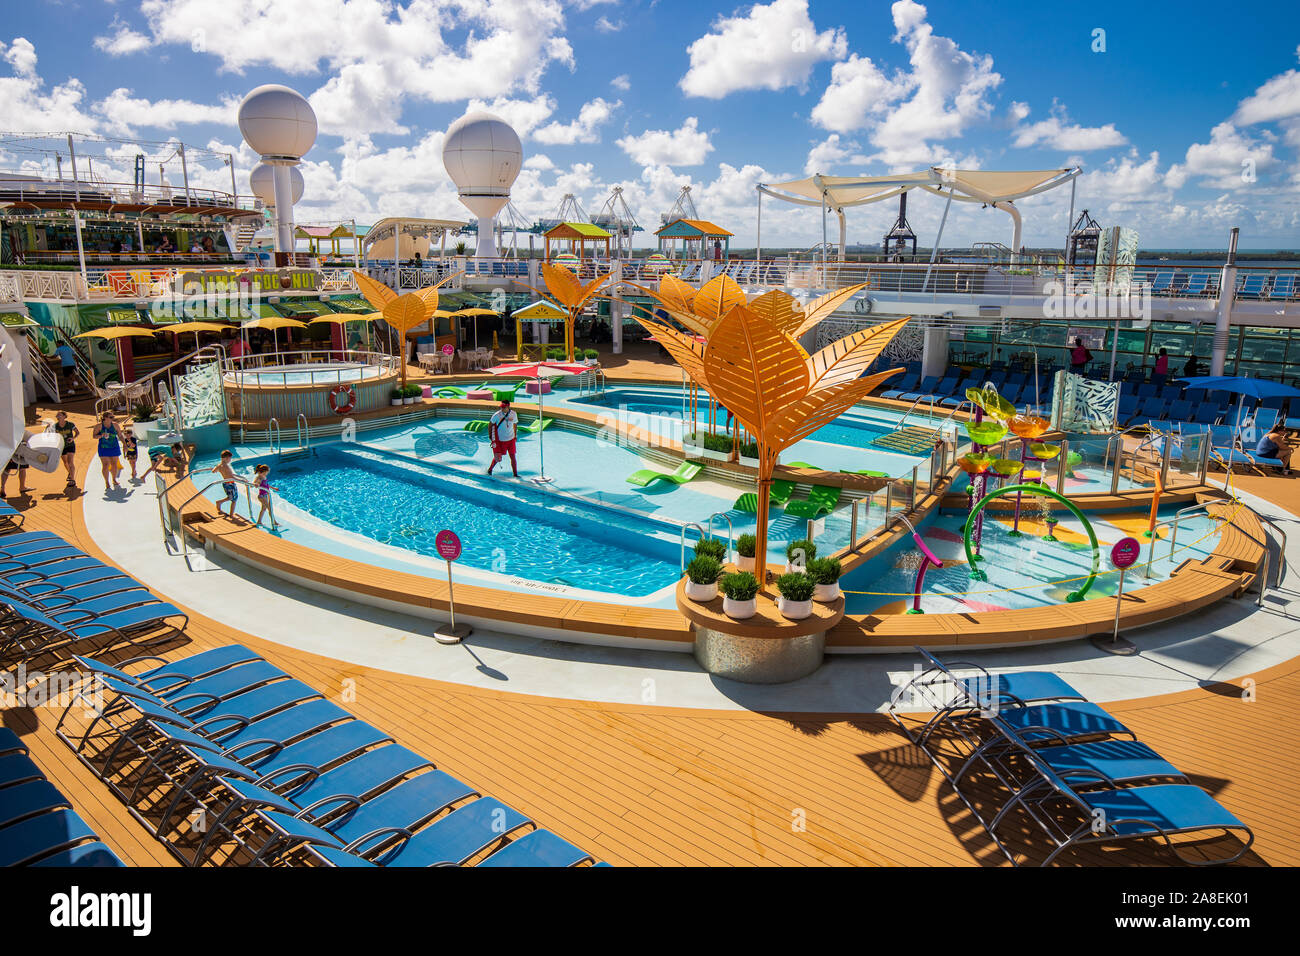 The top of a Royal Caribbean cruise ship with a balcony looking down over a pool with people and lounge chairs. Stock Photo